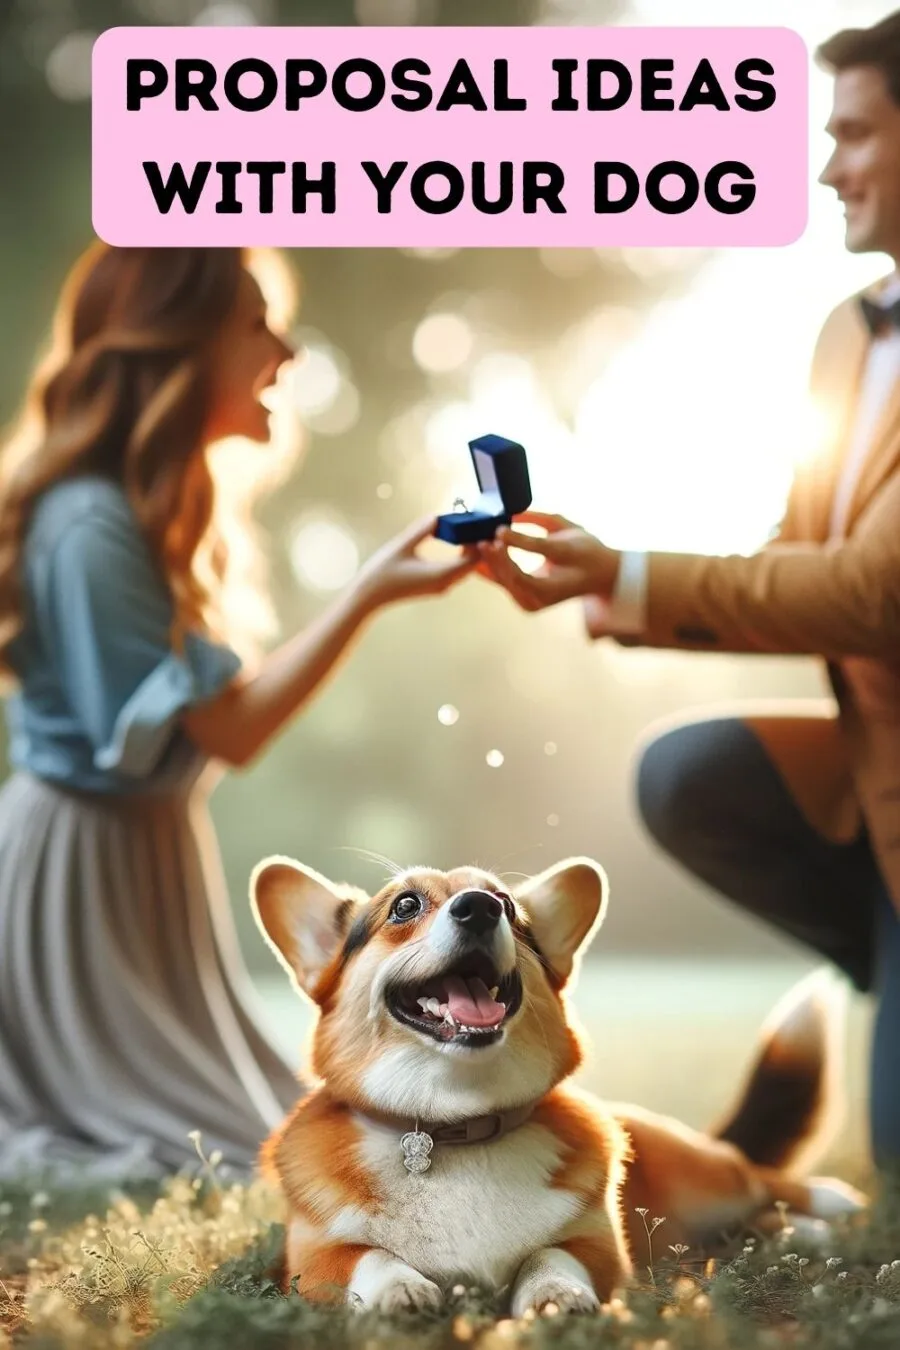 A heartwarming scene for a Pinterest pin, sized 1000x1500 pixels, showcasing a dog participating in a marriage proposal. The setting is a romantic outdoor location, with a soft, natural light enhancing the mood. The dog, a lovable and cute breed such as a Corgi or a Beagle, is gently holding a small box in its mouth, which contains a sparkling wedding ring. The focus of the image is on the dog, positioned in the foreground, with an excited and joyful expression, emphasizing its role in this tender moment. The background subtly hints at a couple in the middle of a proposal, with one person kneeling, capturing the essence of love and the unique bond between humans and their pets in this special life event.